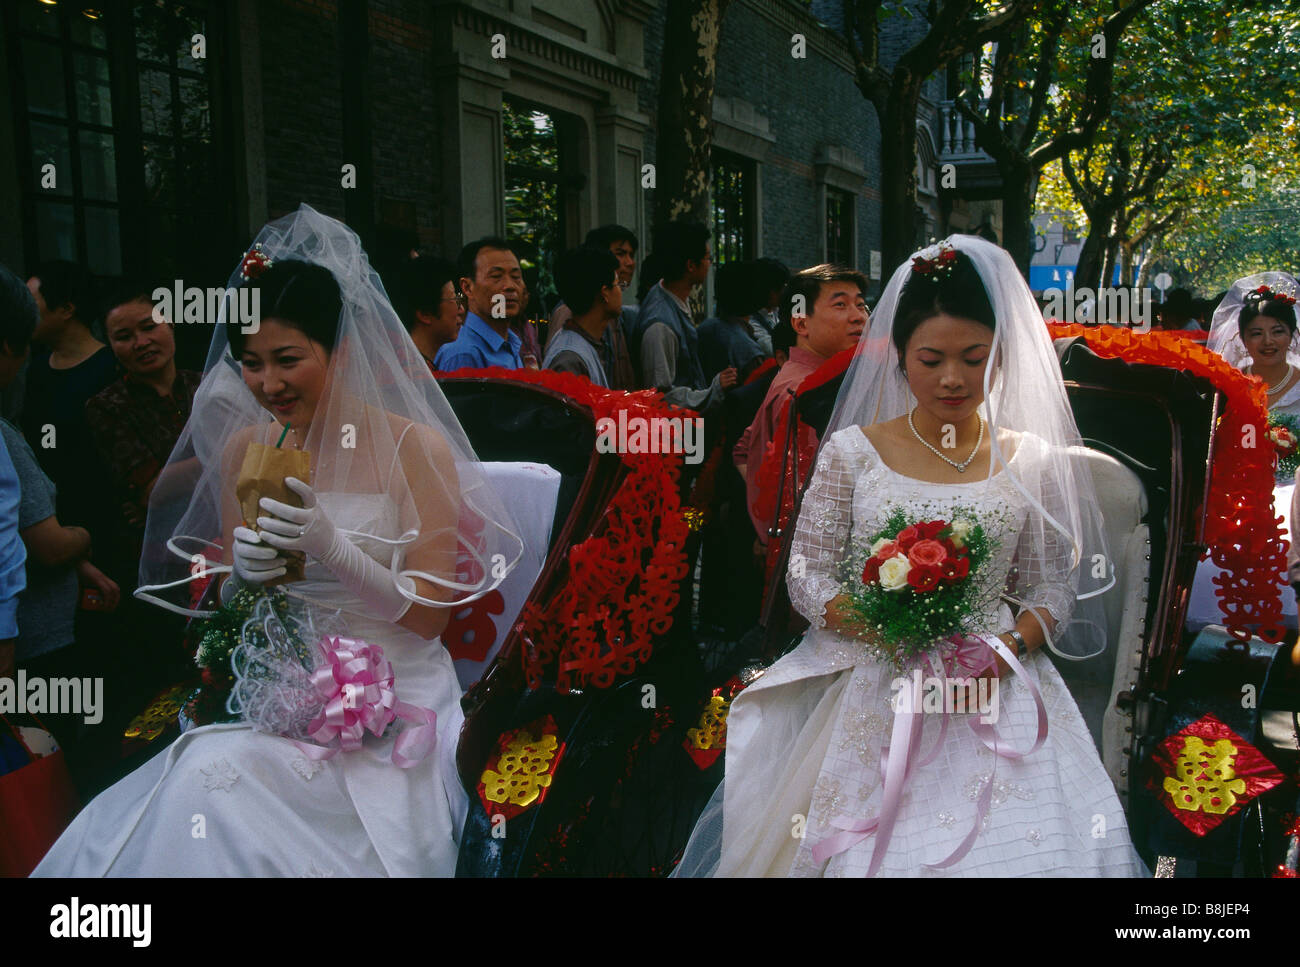 Group wedding Two brides women in white dresses with veils One behind  Seated in red rickshaws People SHANGHAI CHINA Stock Photo - Alamy